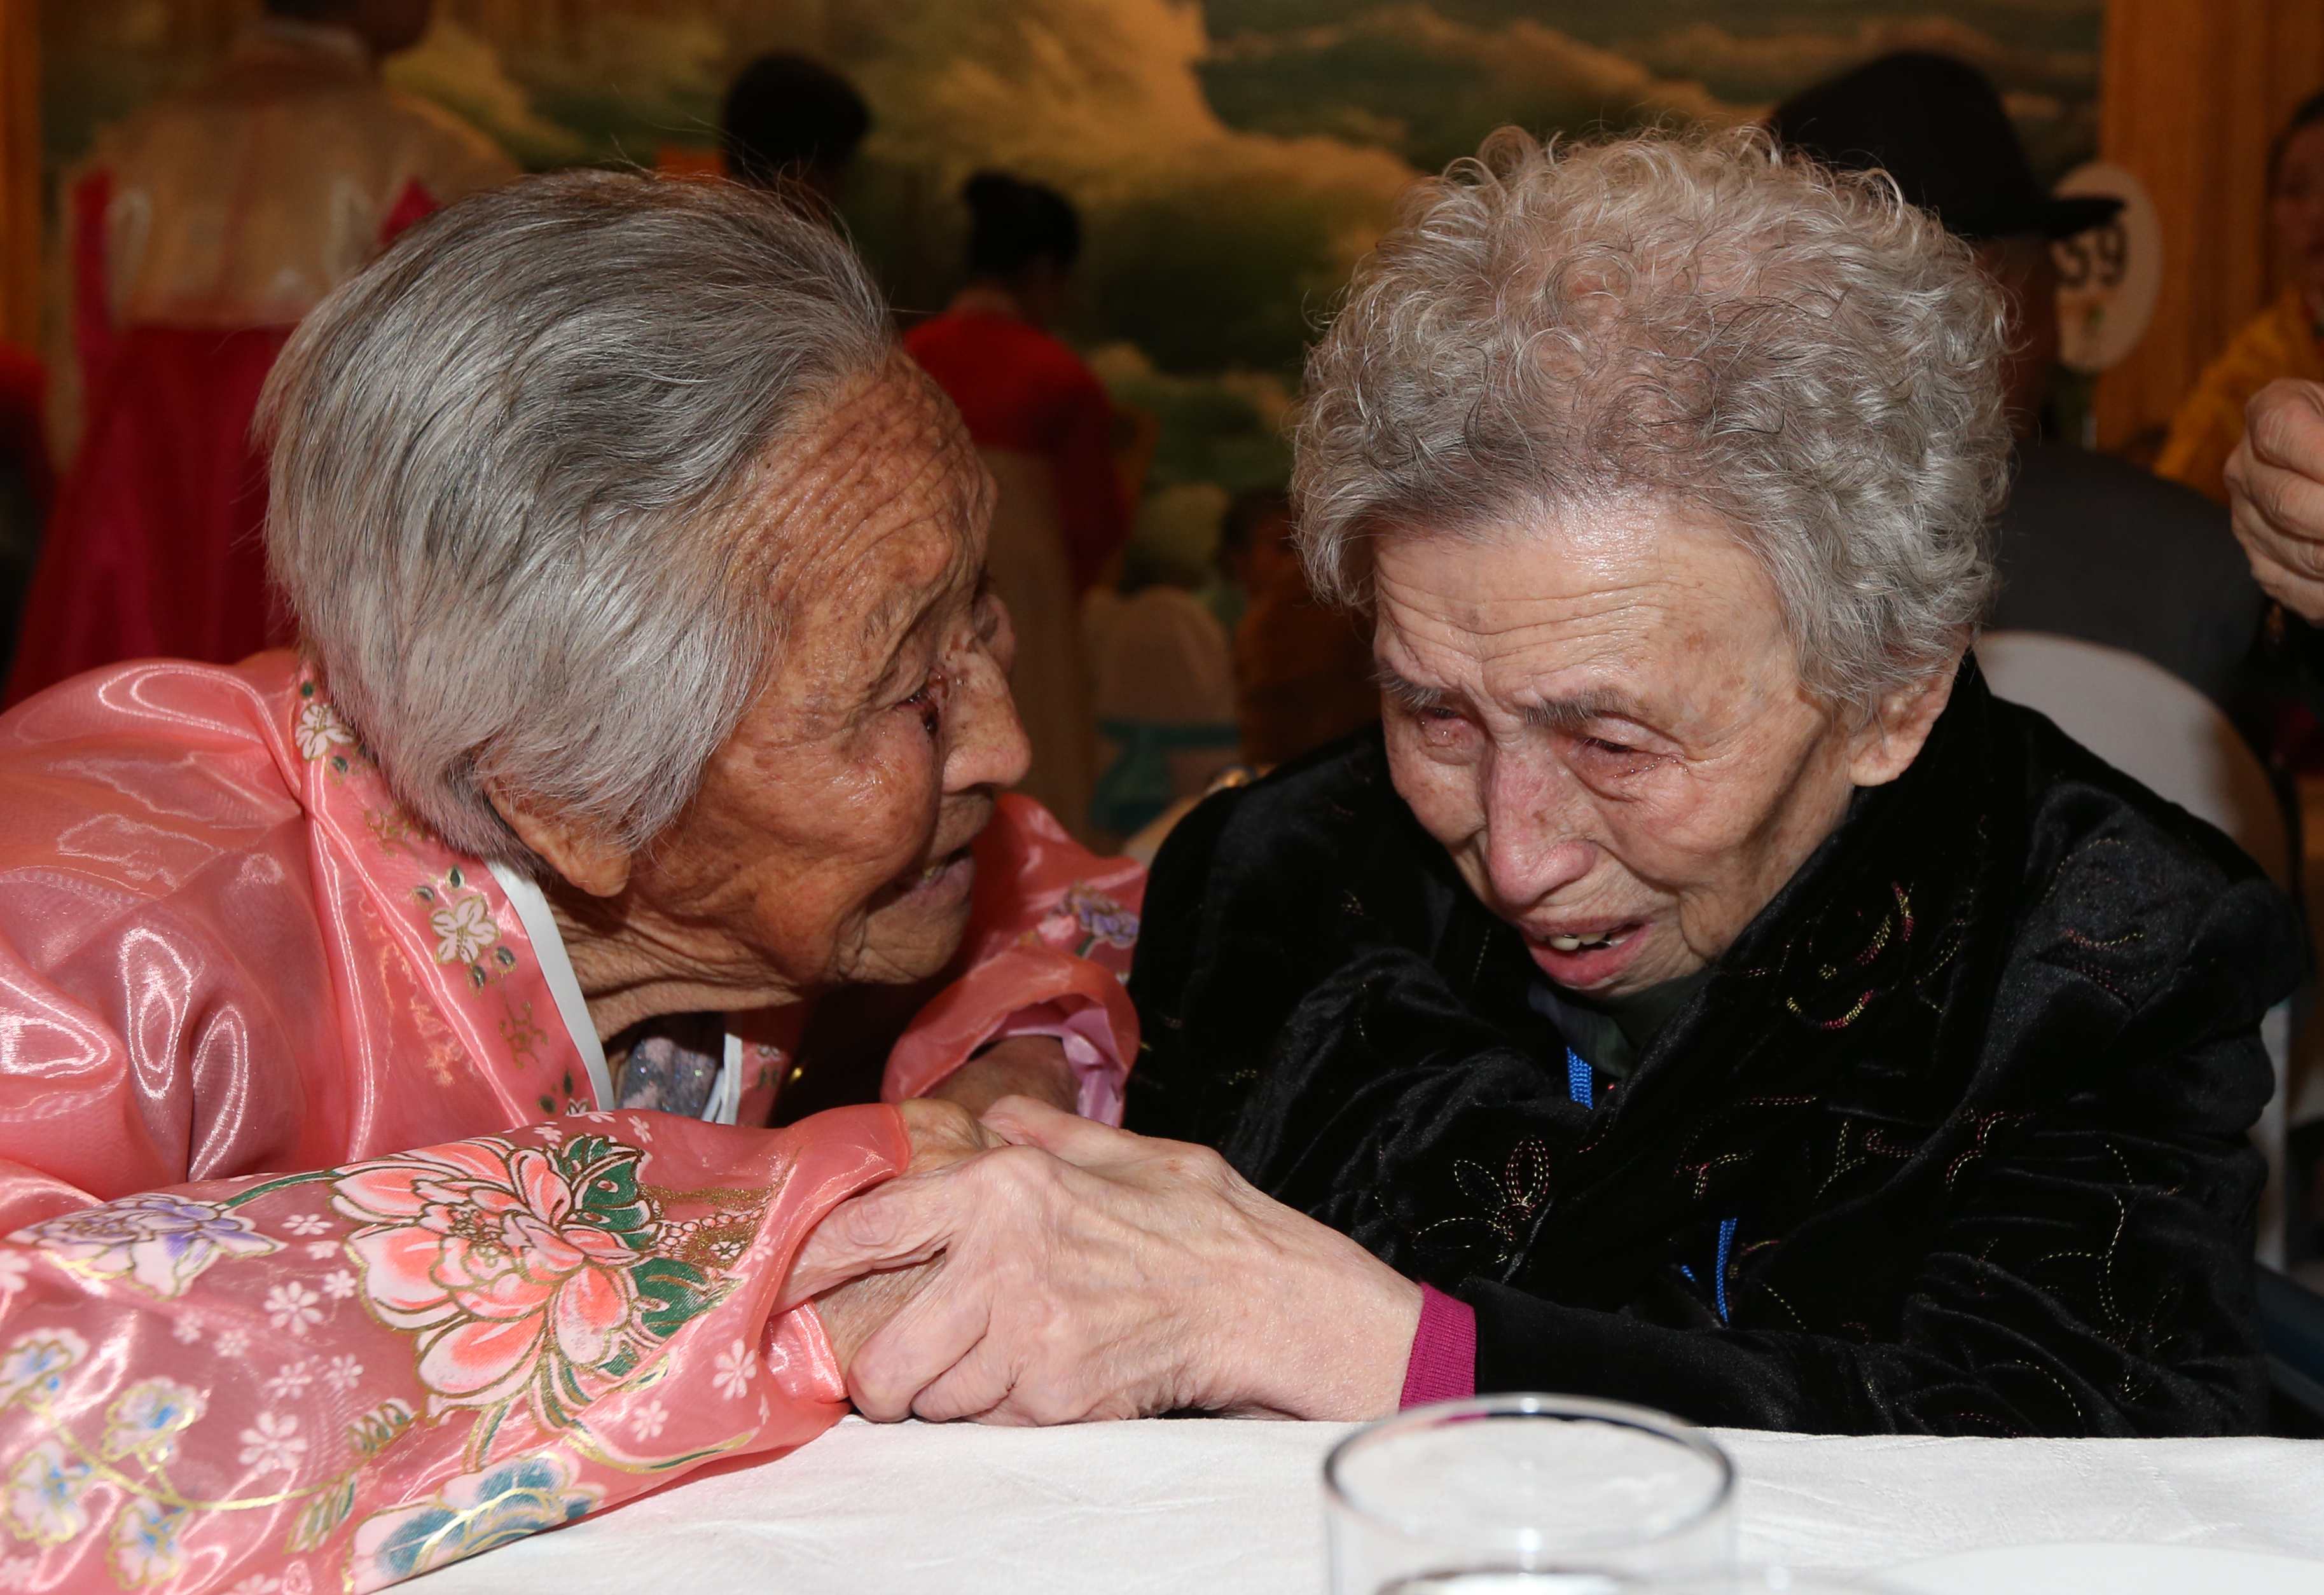 Lee Young-shil, 86, right, from South Korea, cannot hold back her tears as she finally got to meet her younger sister Lee Jung-shil, 83, who lives in North Korea. (Yonhap)